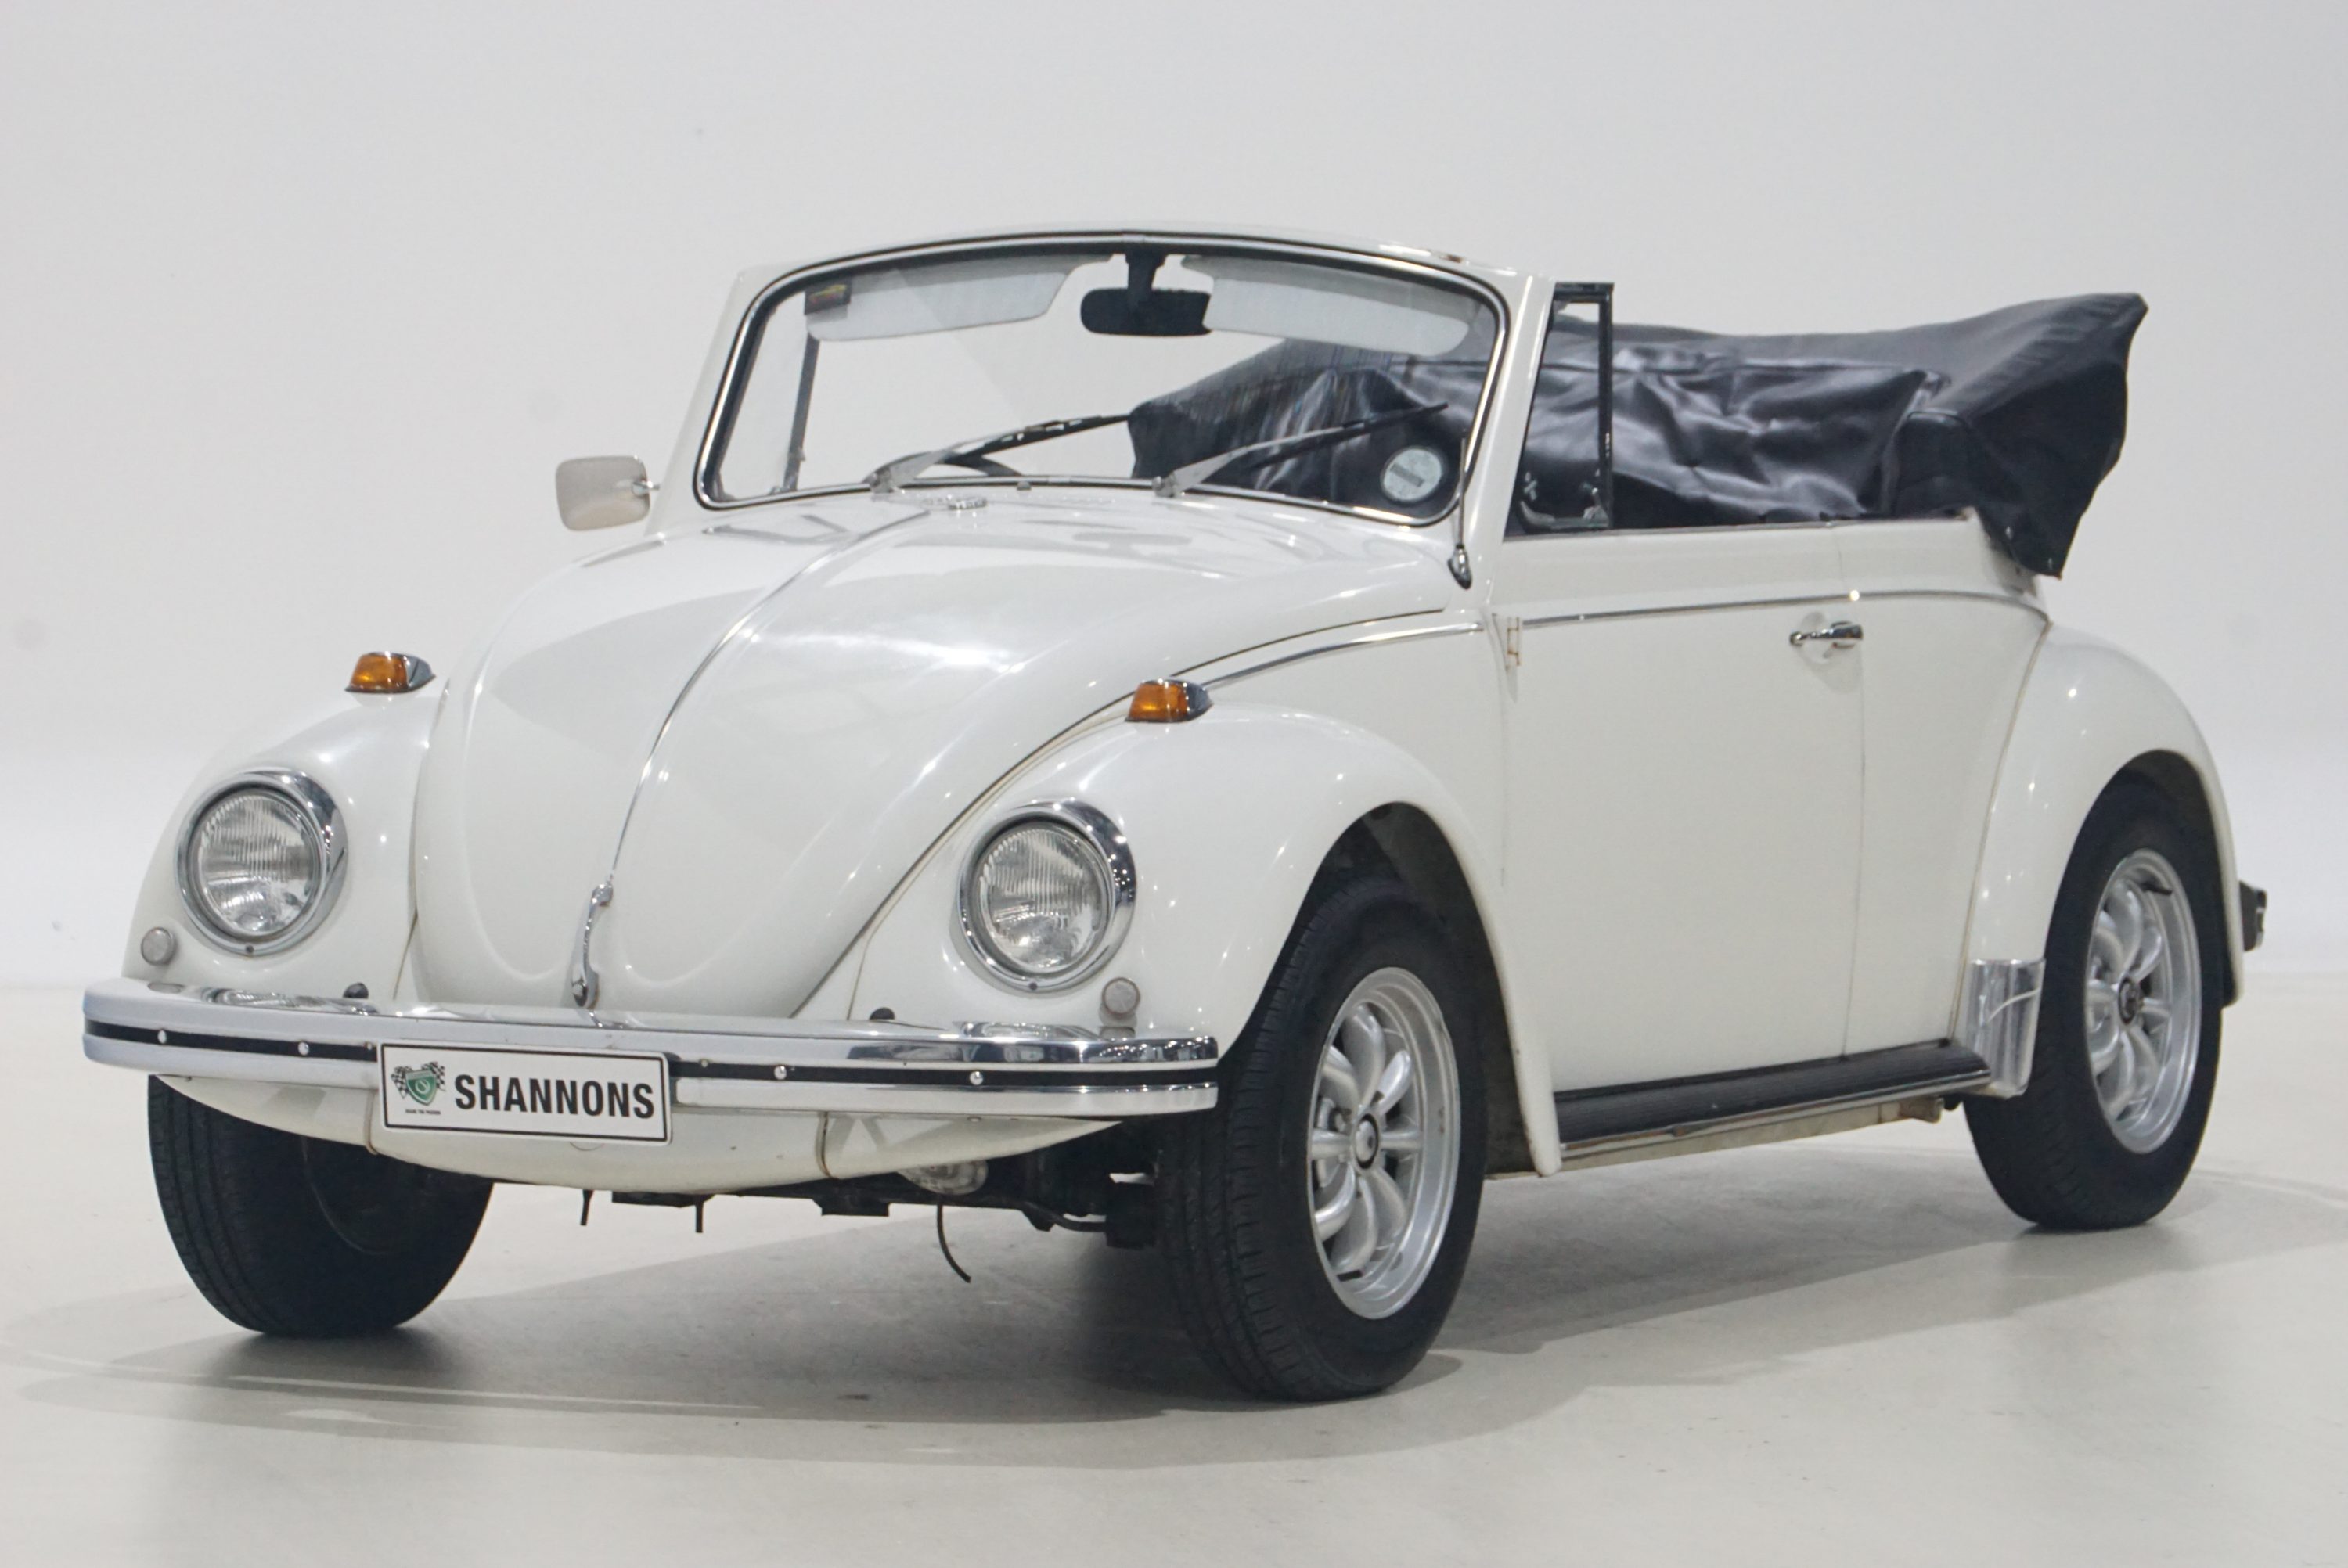 This original right hand drive 1970 VW Beetle Karmann Cabriolet – one of 330,000 built – is expected to sell in  the $30,000-$35,000 range  at at Shannons Spring Timed Online Auction from August 31 – September 7.